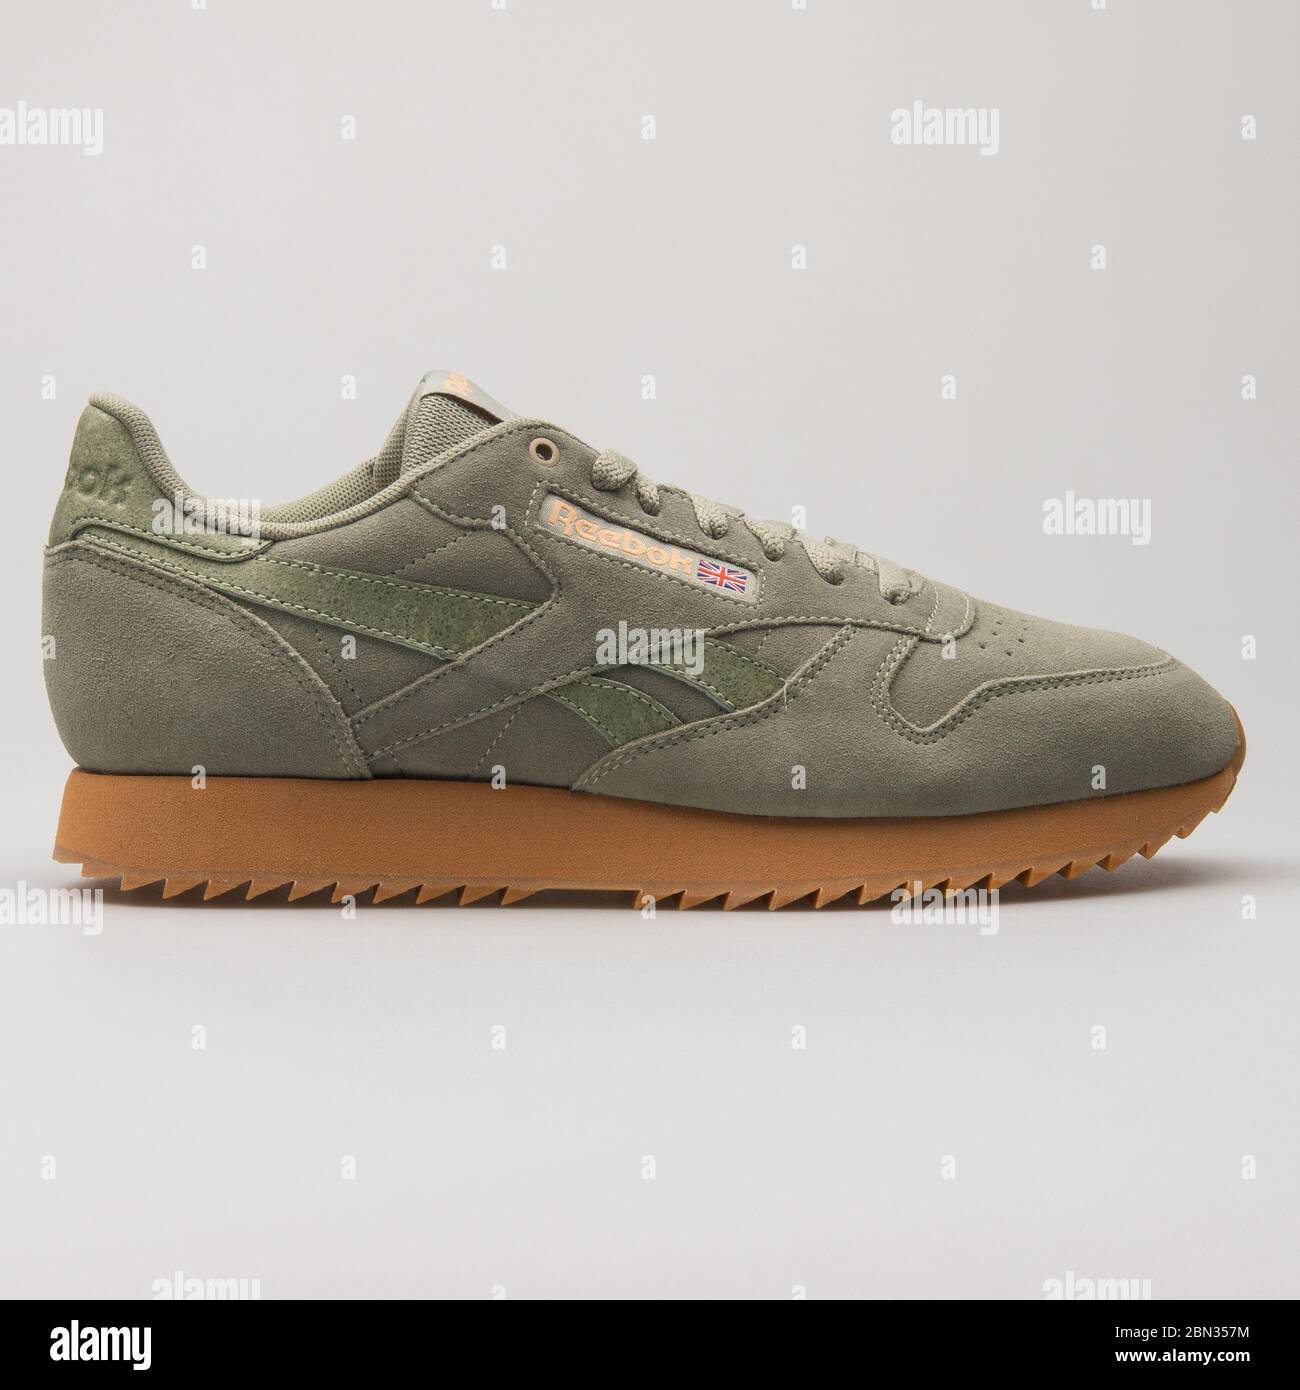 VIENNA, AUSTRIA - AUGUST 13, 2018: Reebok Classic Leather Ripple olive  green and brown sneaker on white background Stock Photo - Alamy